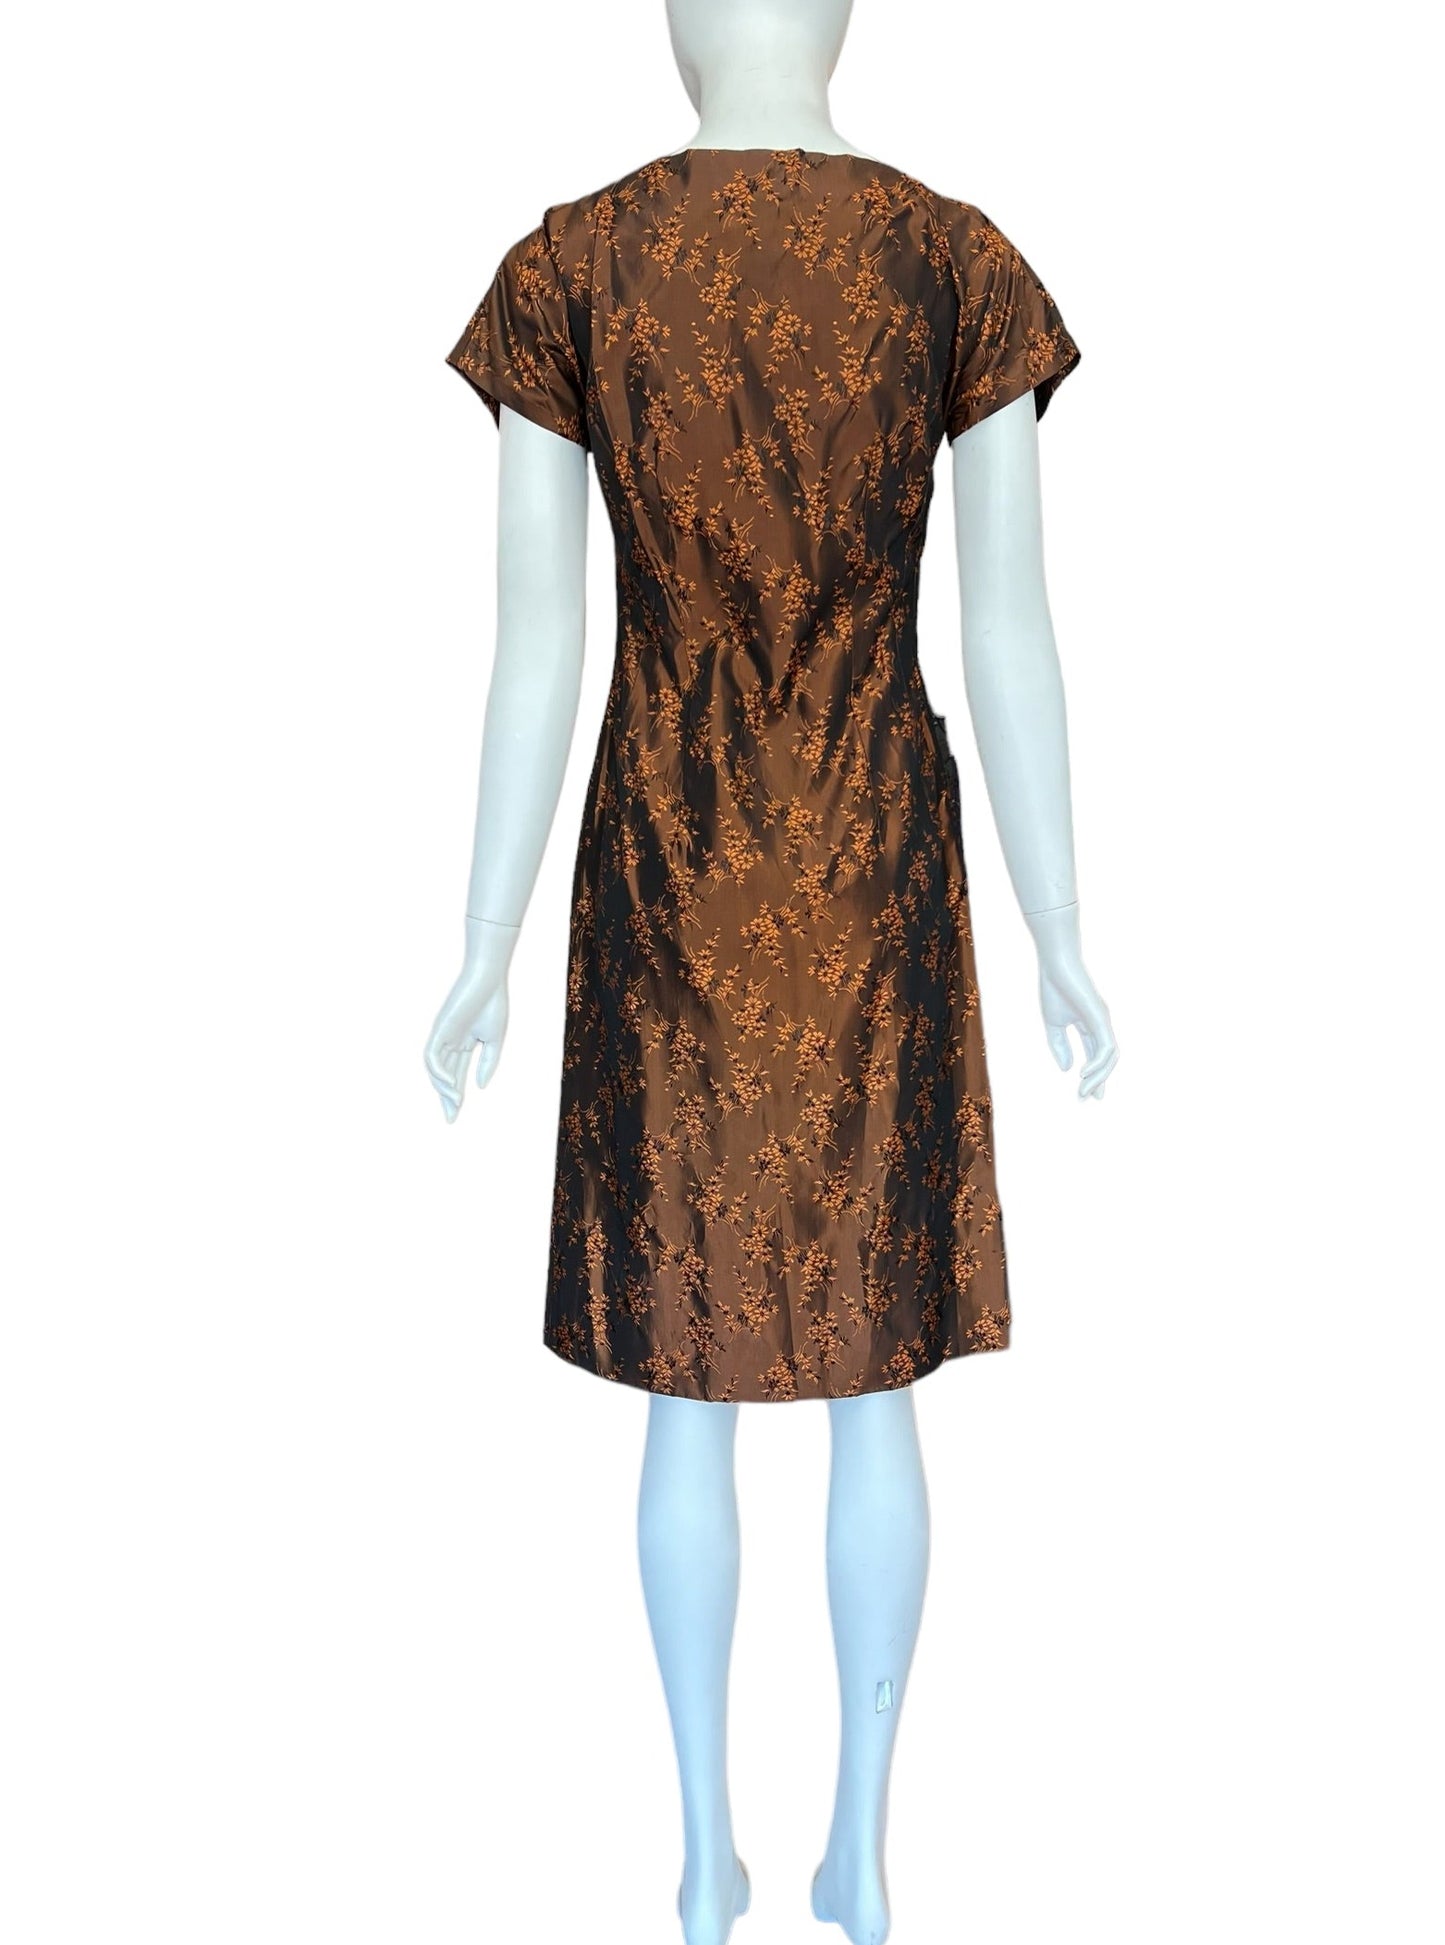 Rust colored bronze irridescent 50's dress handmade one of a kind vintage cocktail style